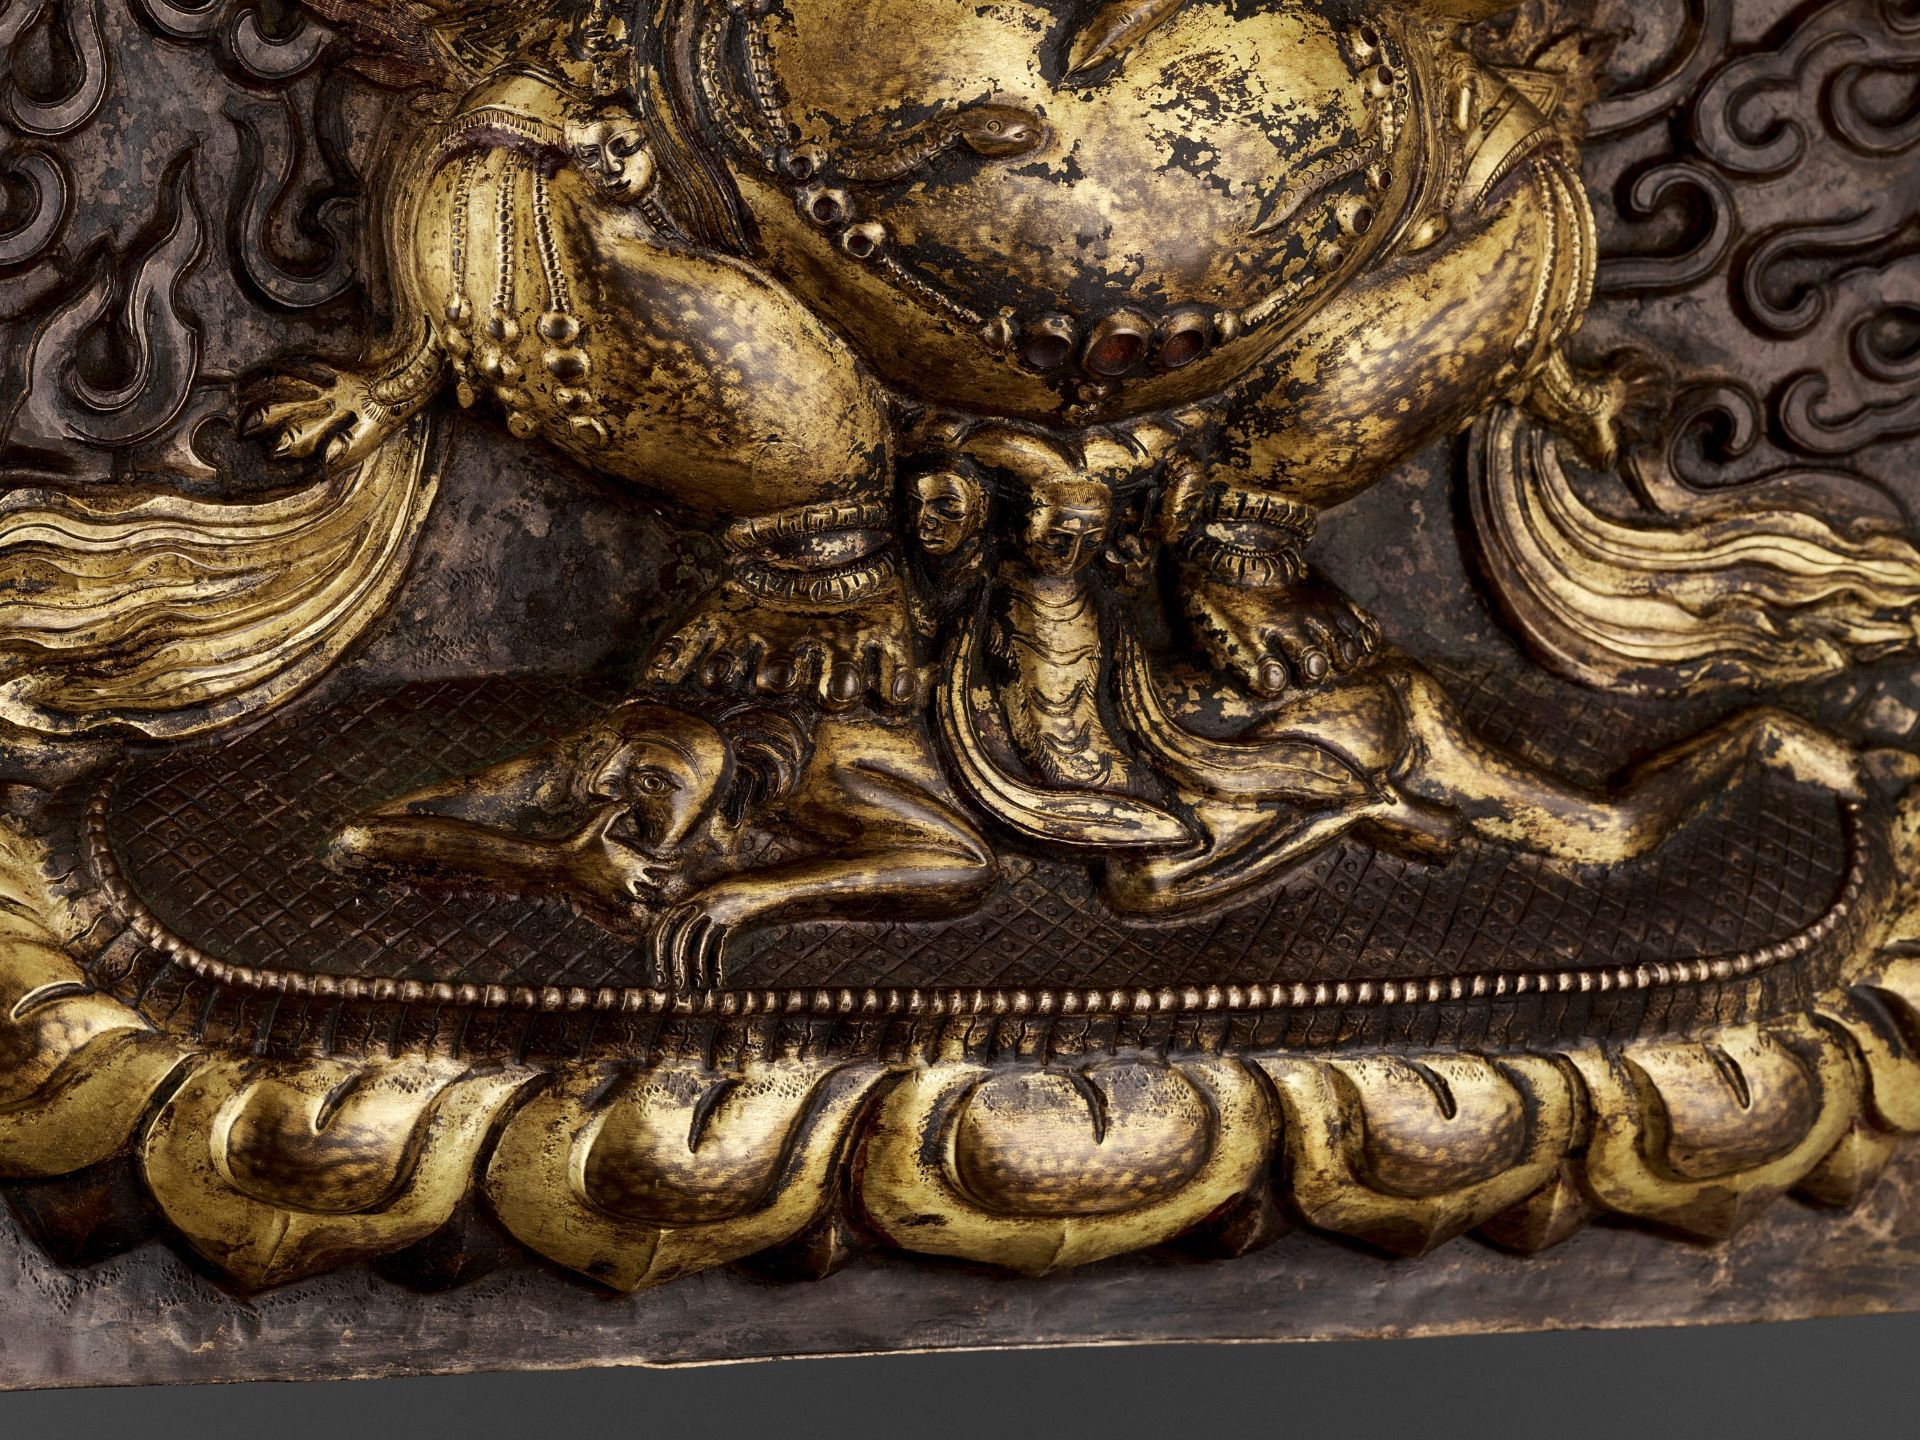 A LARGE GILT-COPPER REPOUSSE RELIEF OF MAHAKALA, 18TH-19TH CENTURY - Image 3 of 8